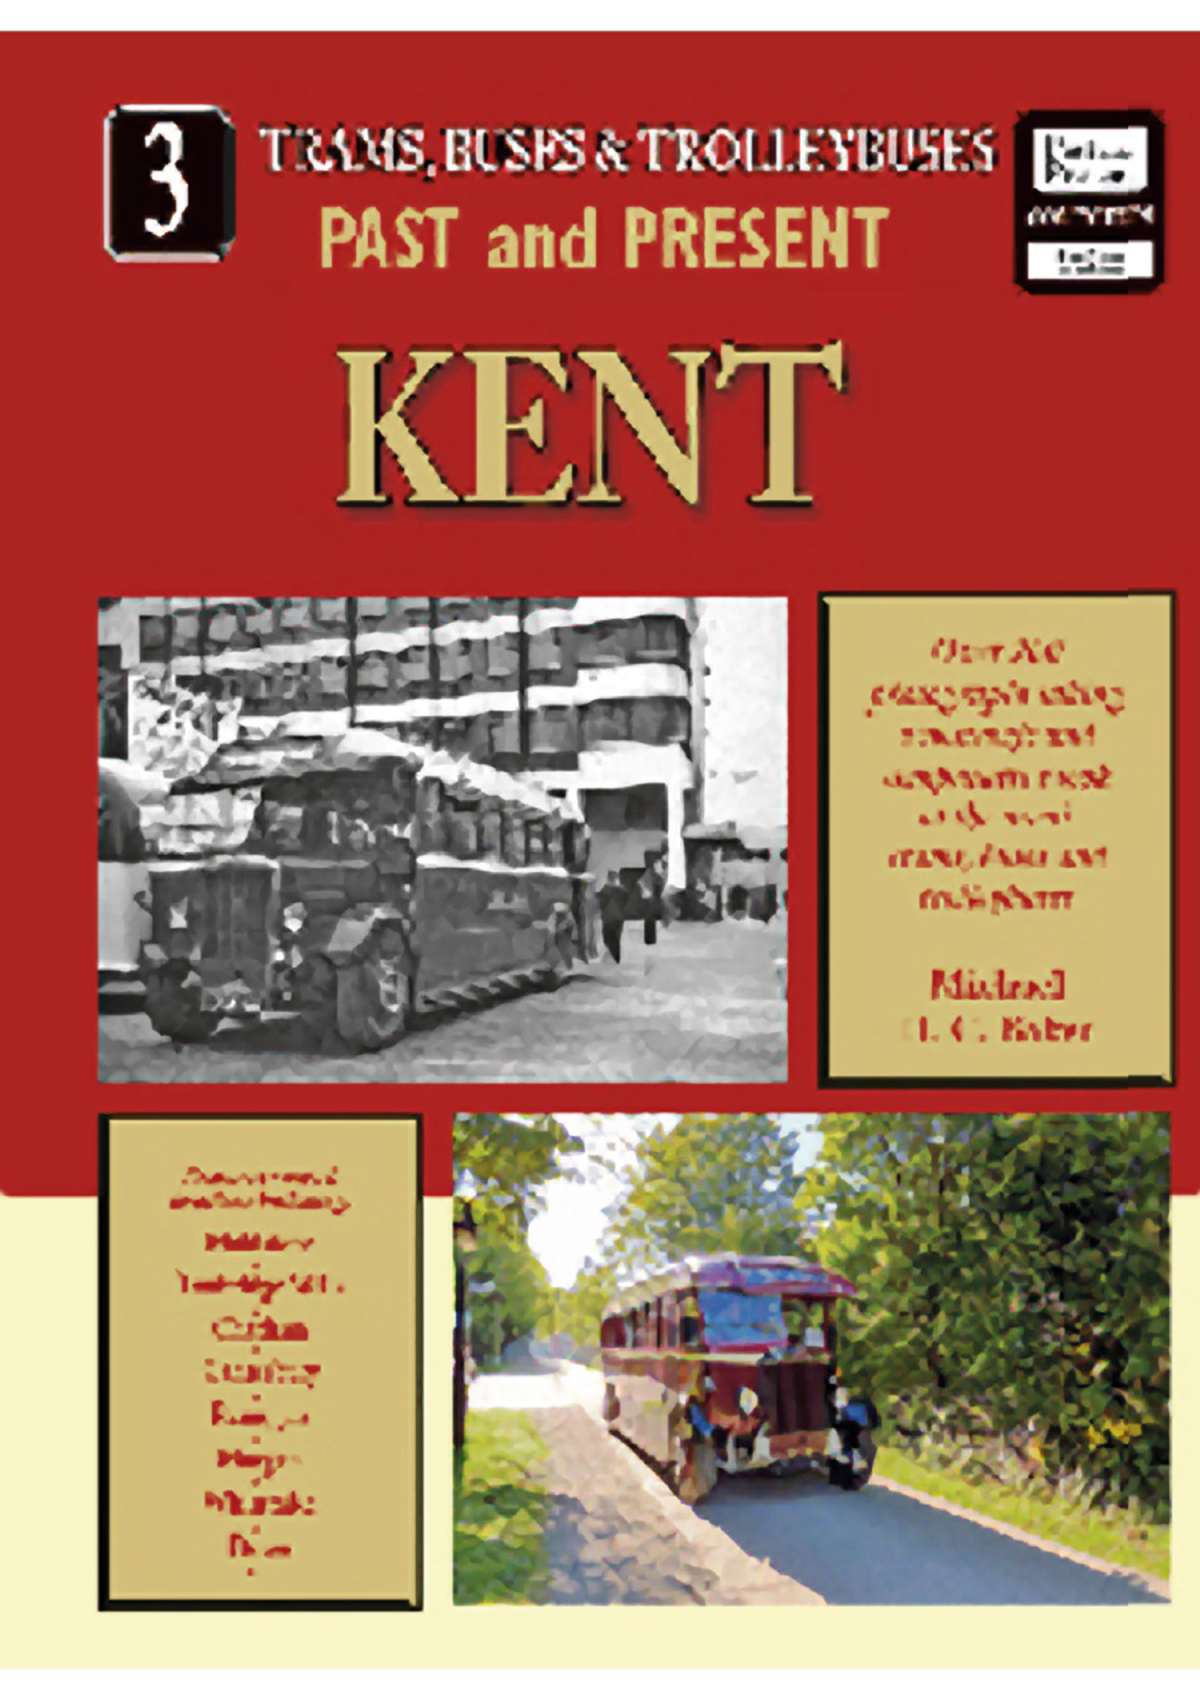 2987 - Trams Buses and Trolleybuses Past and PresentNo 3 Kent